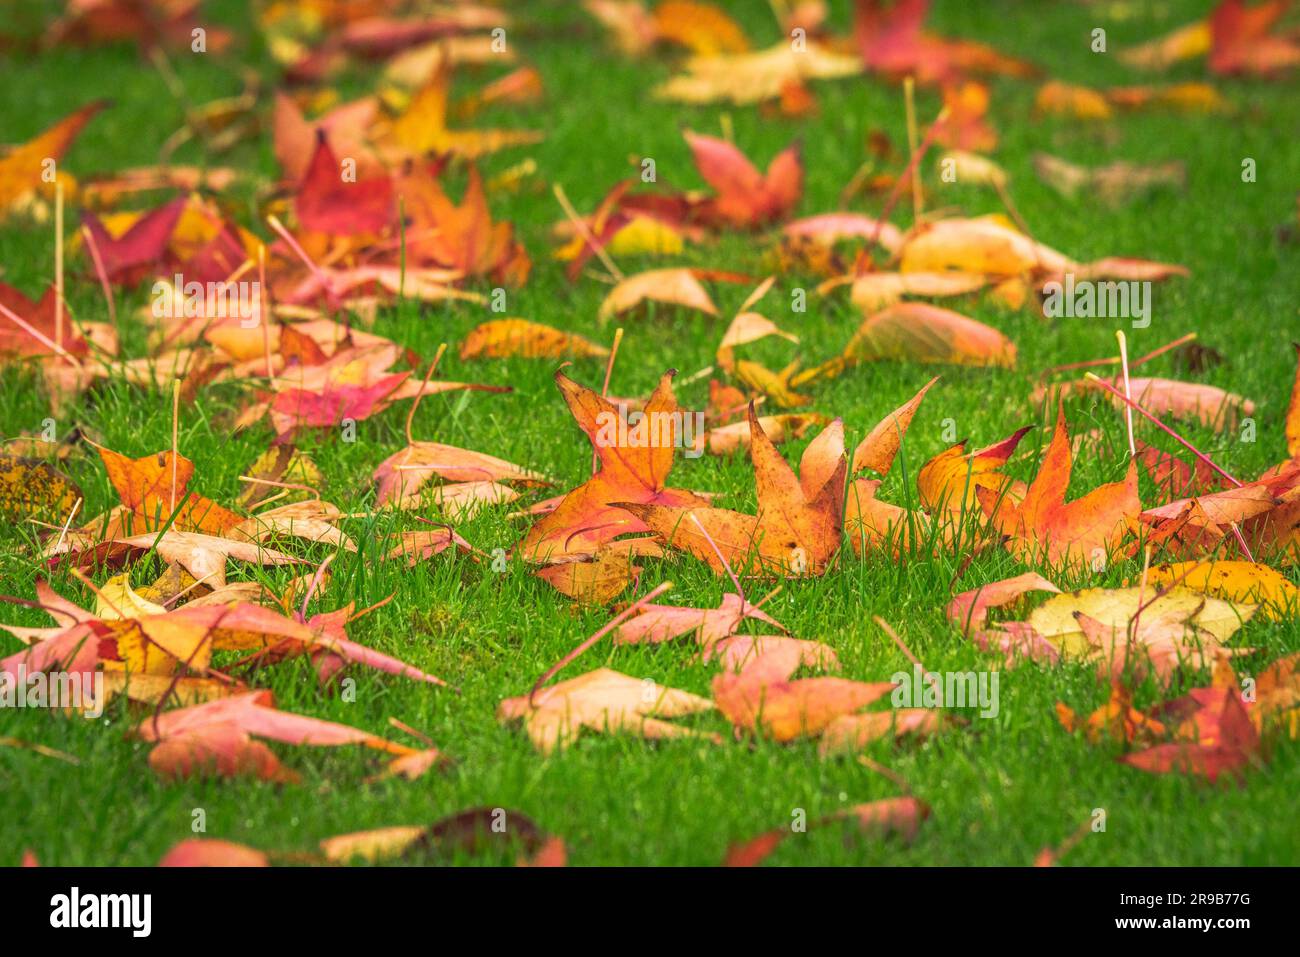 Golden maple leaves on a green lawn in the fall in warm colors Stock Photo